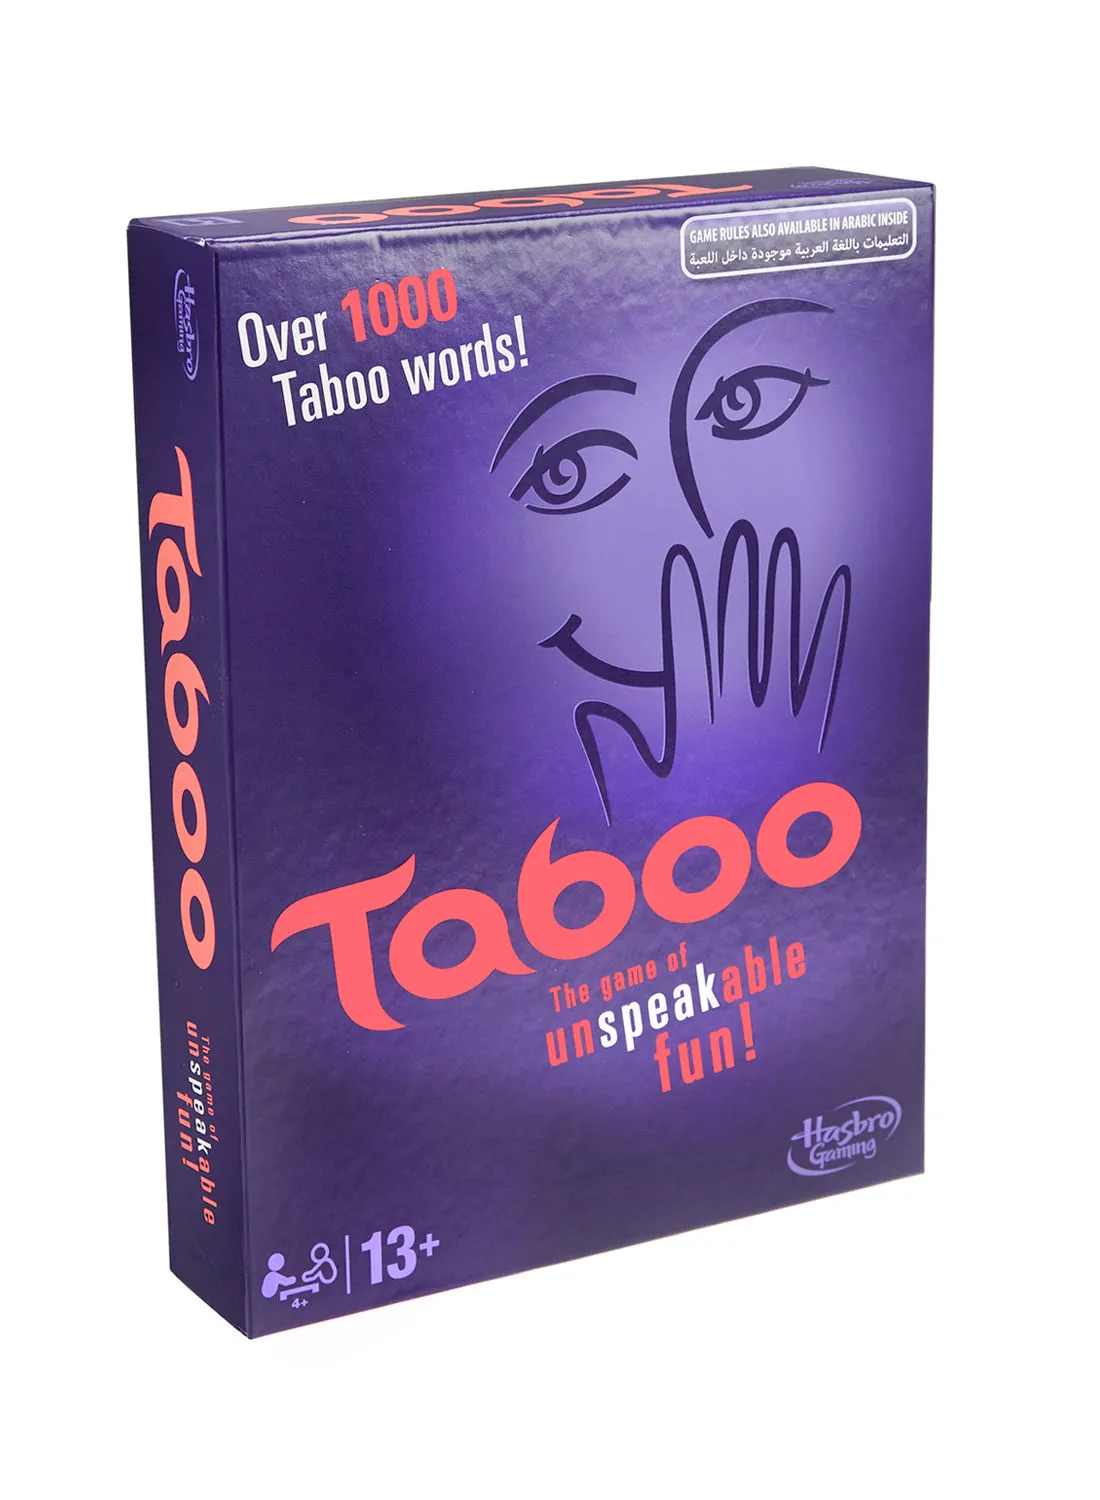 HASBRO - GAMING Taboo Board Game, Guessing Game For Families And Kids Ages 13 And Up 48x200x267mm